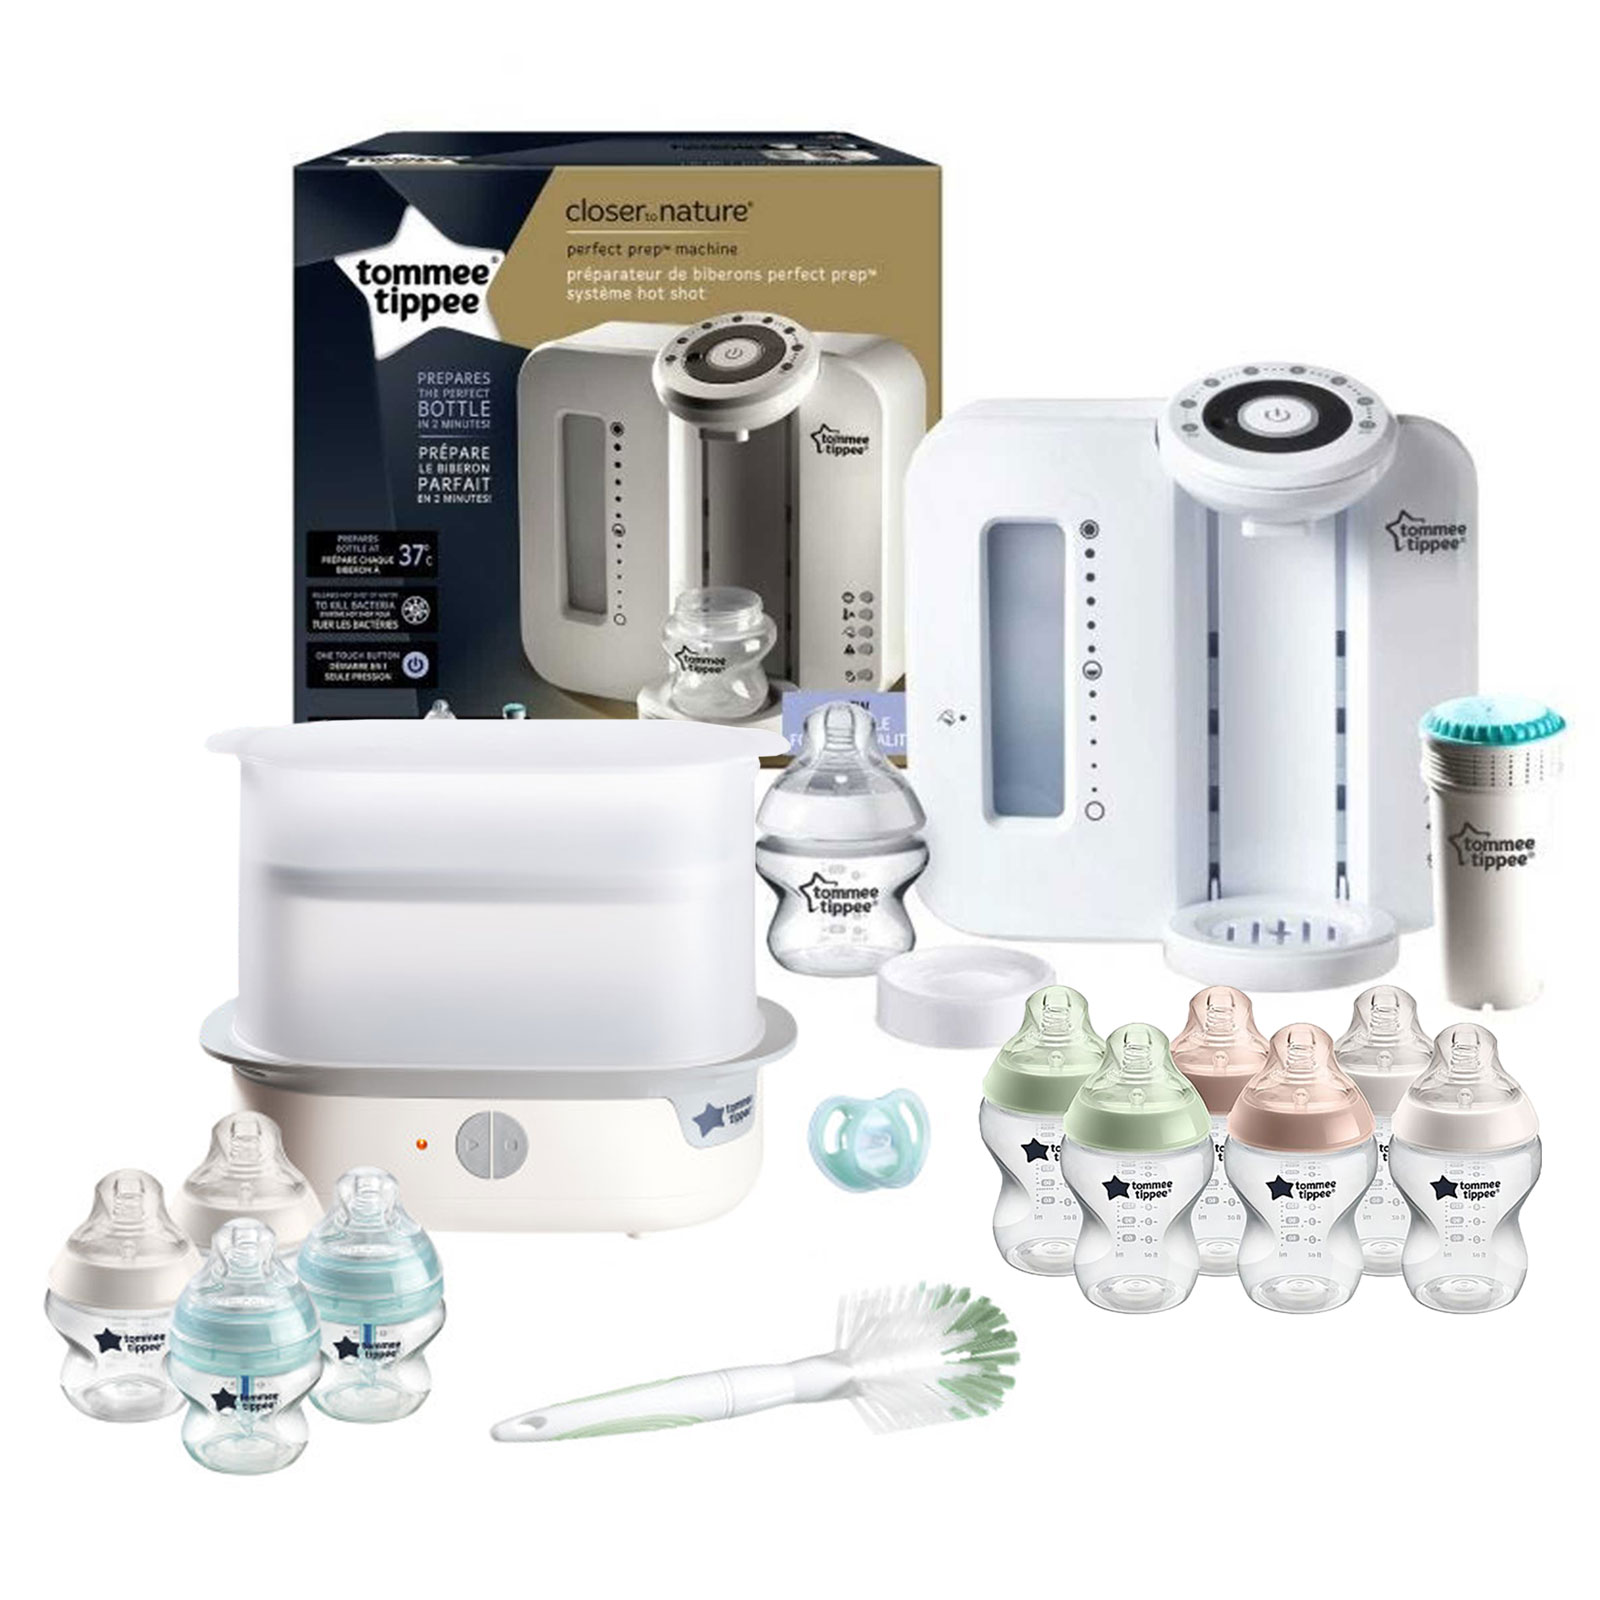 Tommee Tippee 15pc Perfect Prep Machine Complete Steriliser Baby Bottle Feeding Bundle - White / Natural